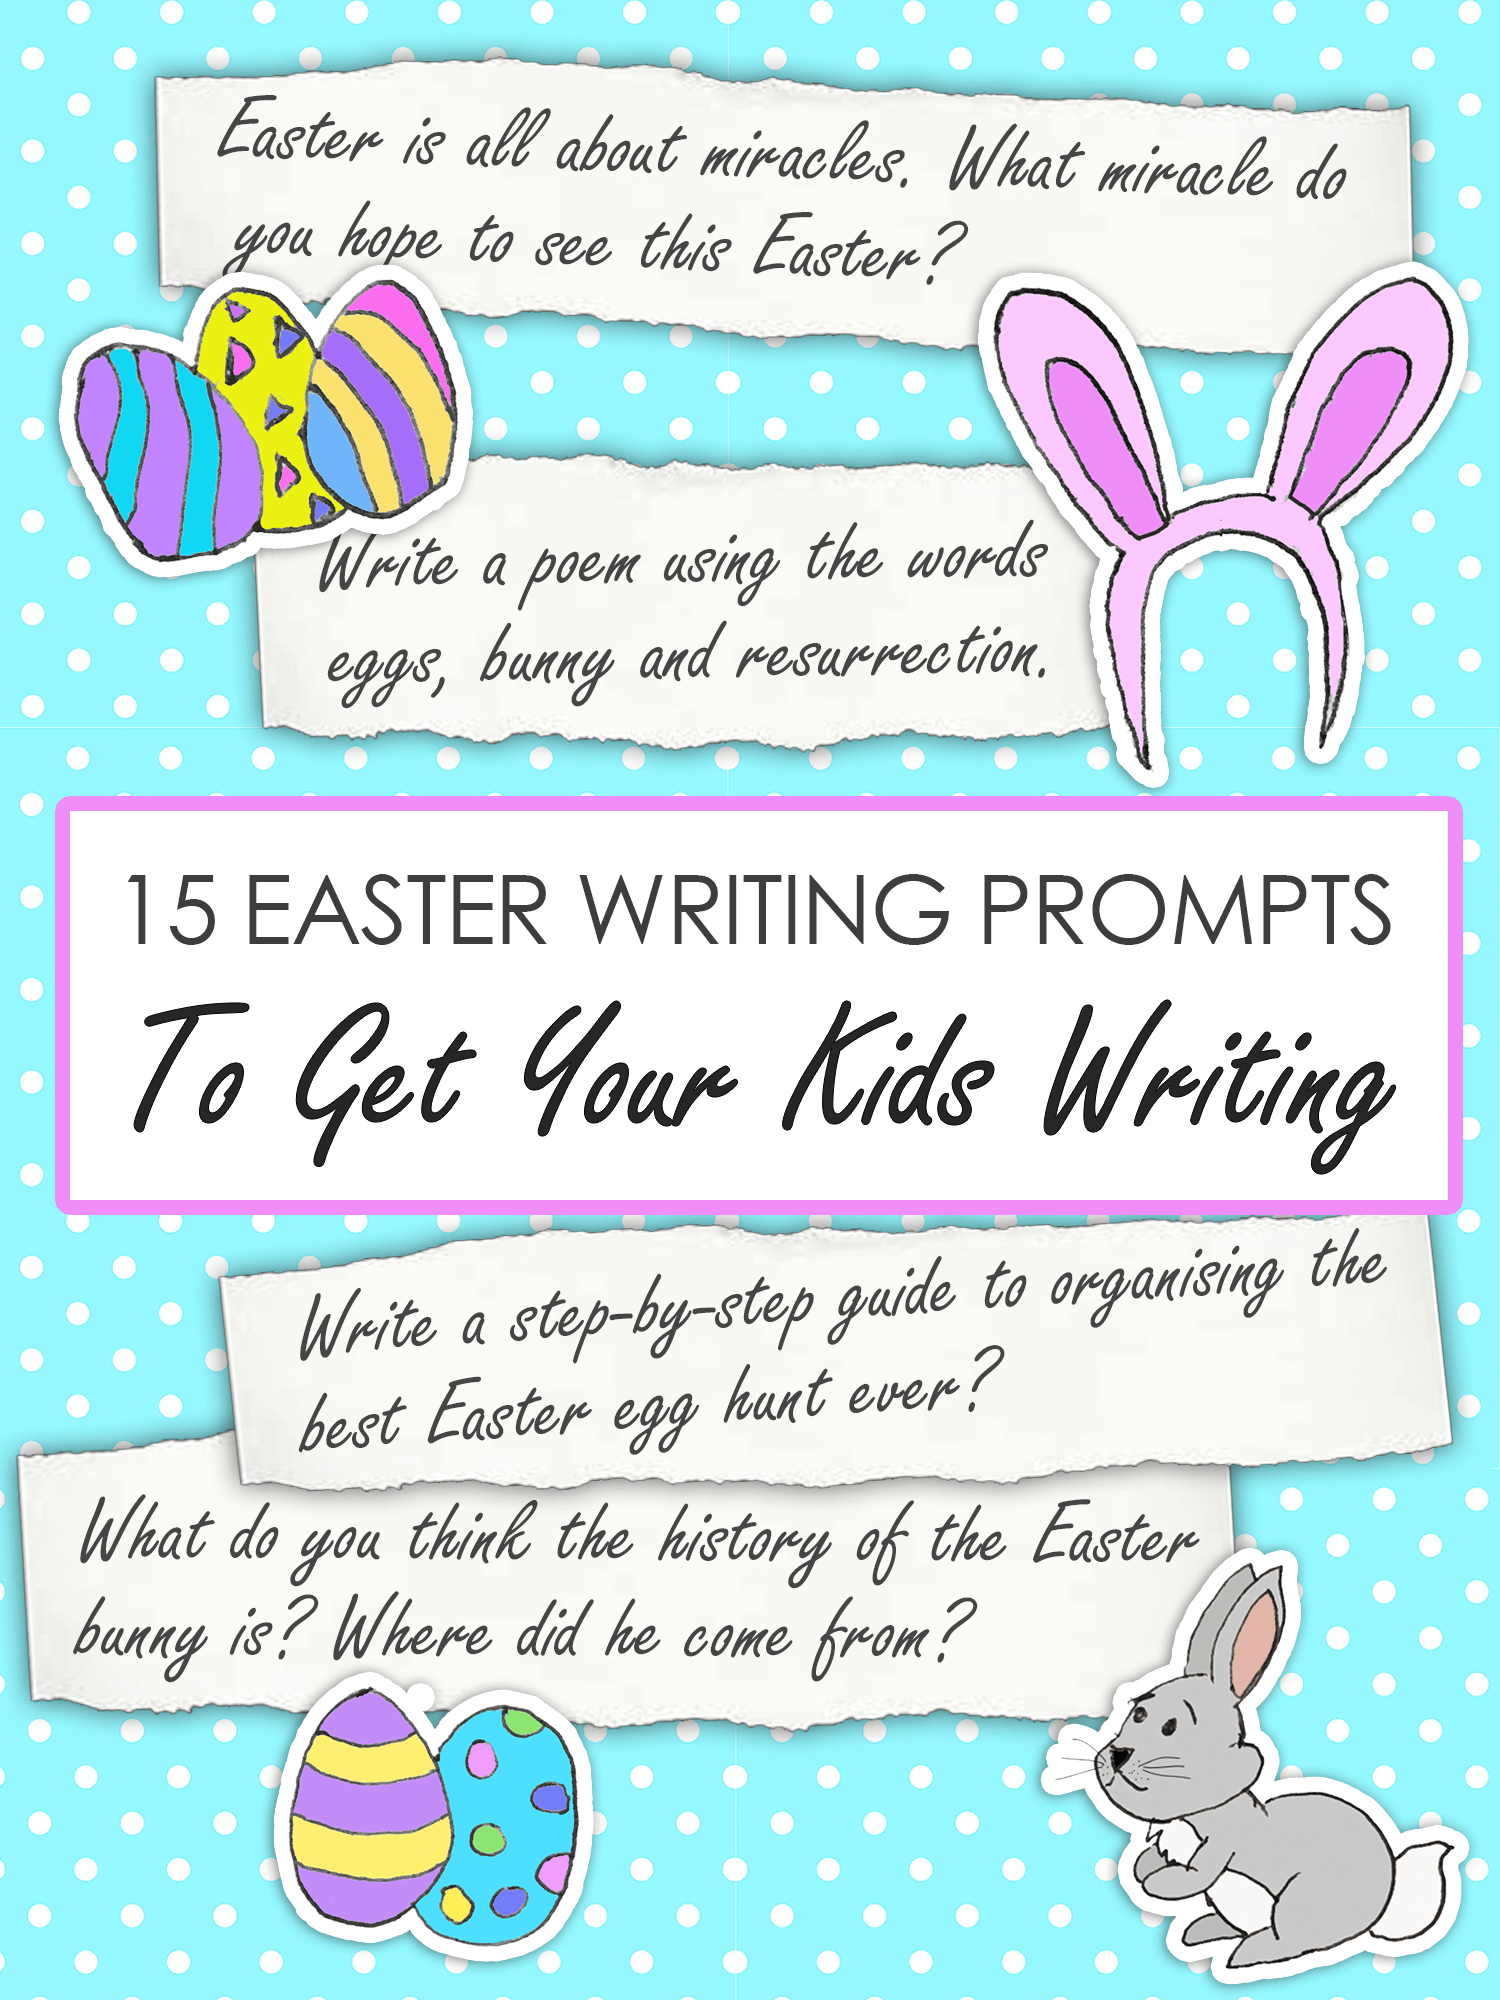 15 Easter Writing Prompts for Kids | Imagine Forest